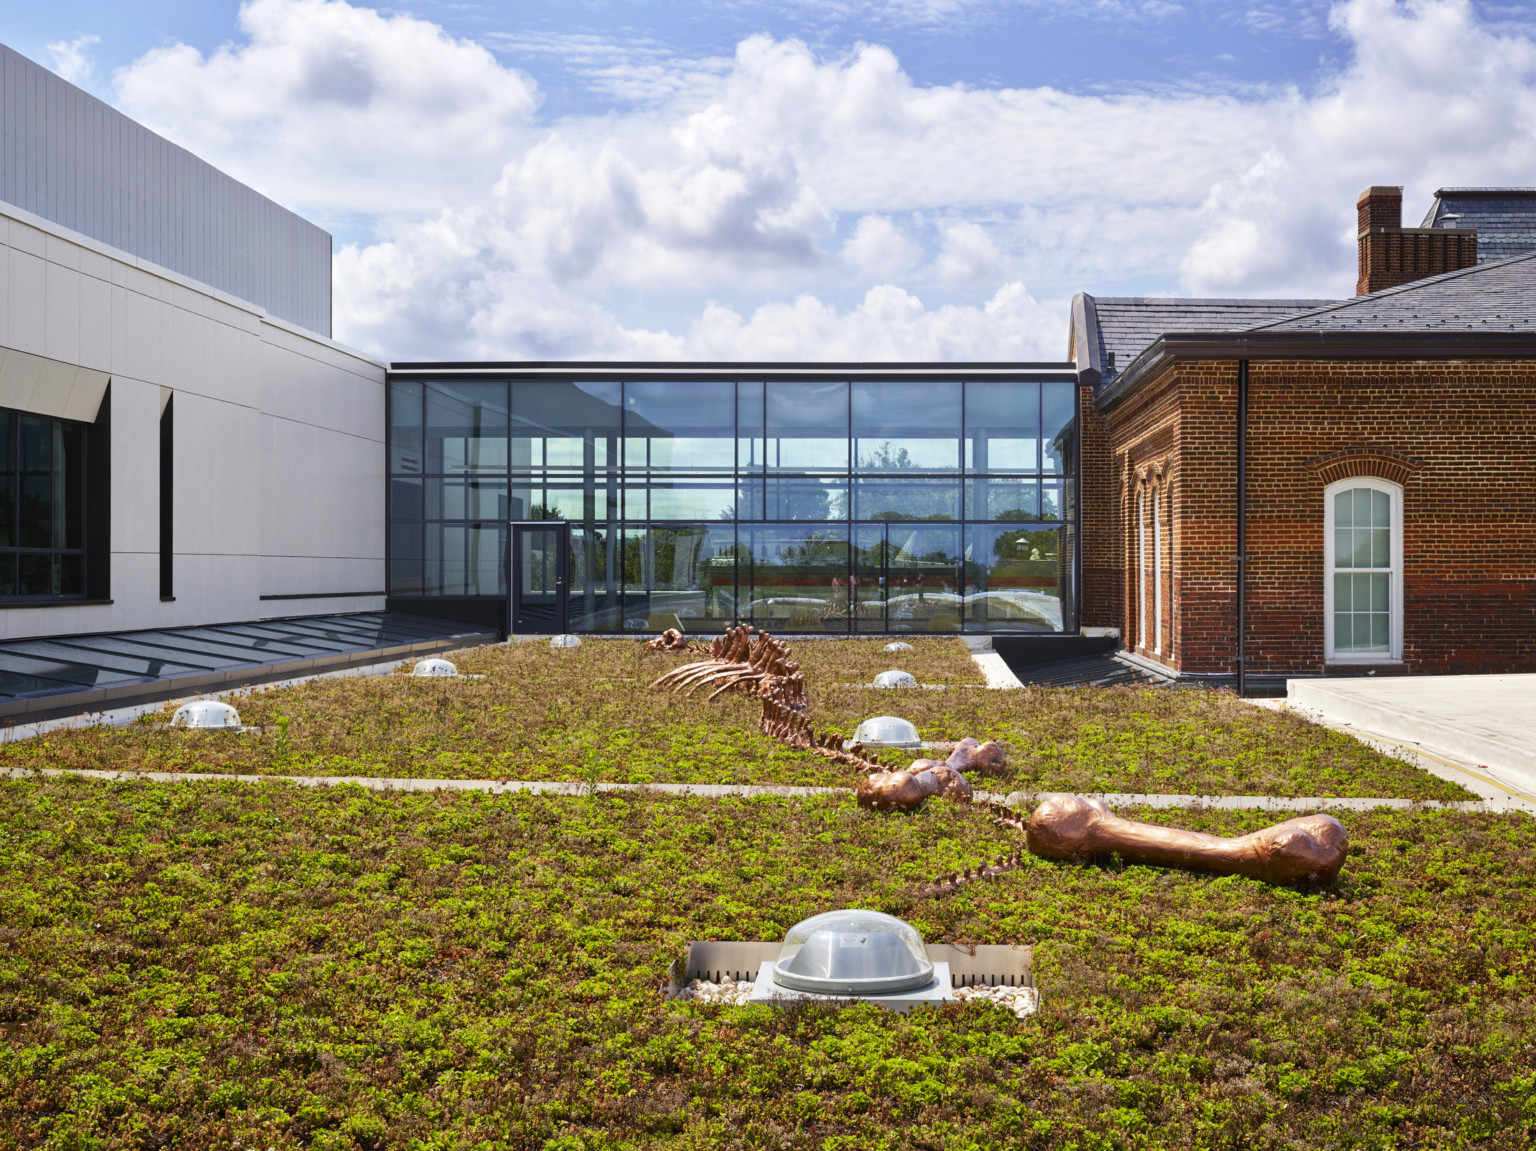 Patio green roof with partially buried dinosaur skeleton sculpture. Brick building connects to white building by glass hall